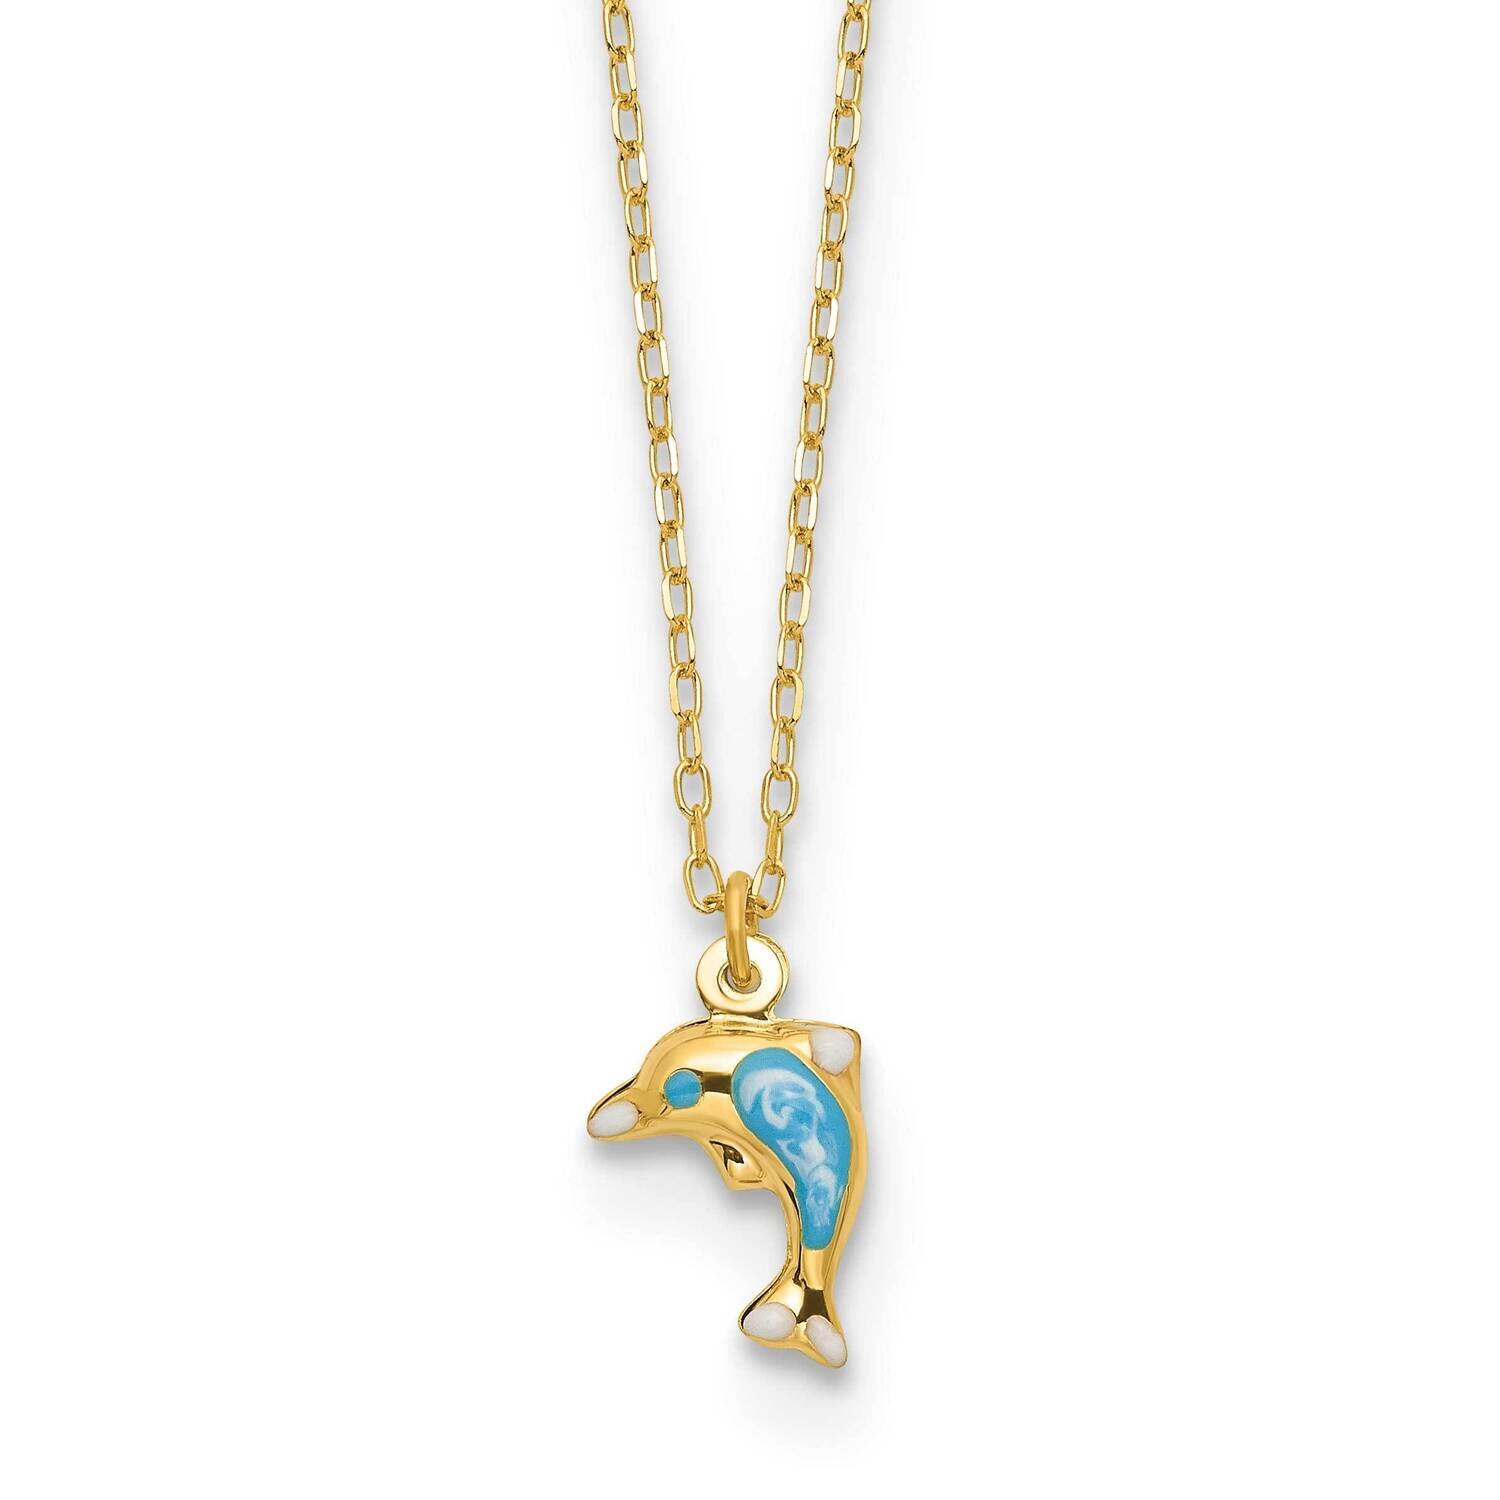 Enameled Dolphin 16.5 Inch Necklace 14k Gold Polished SF2893-16.5